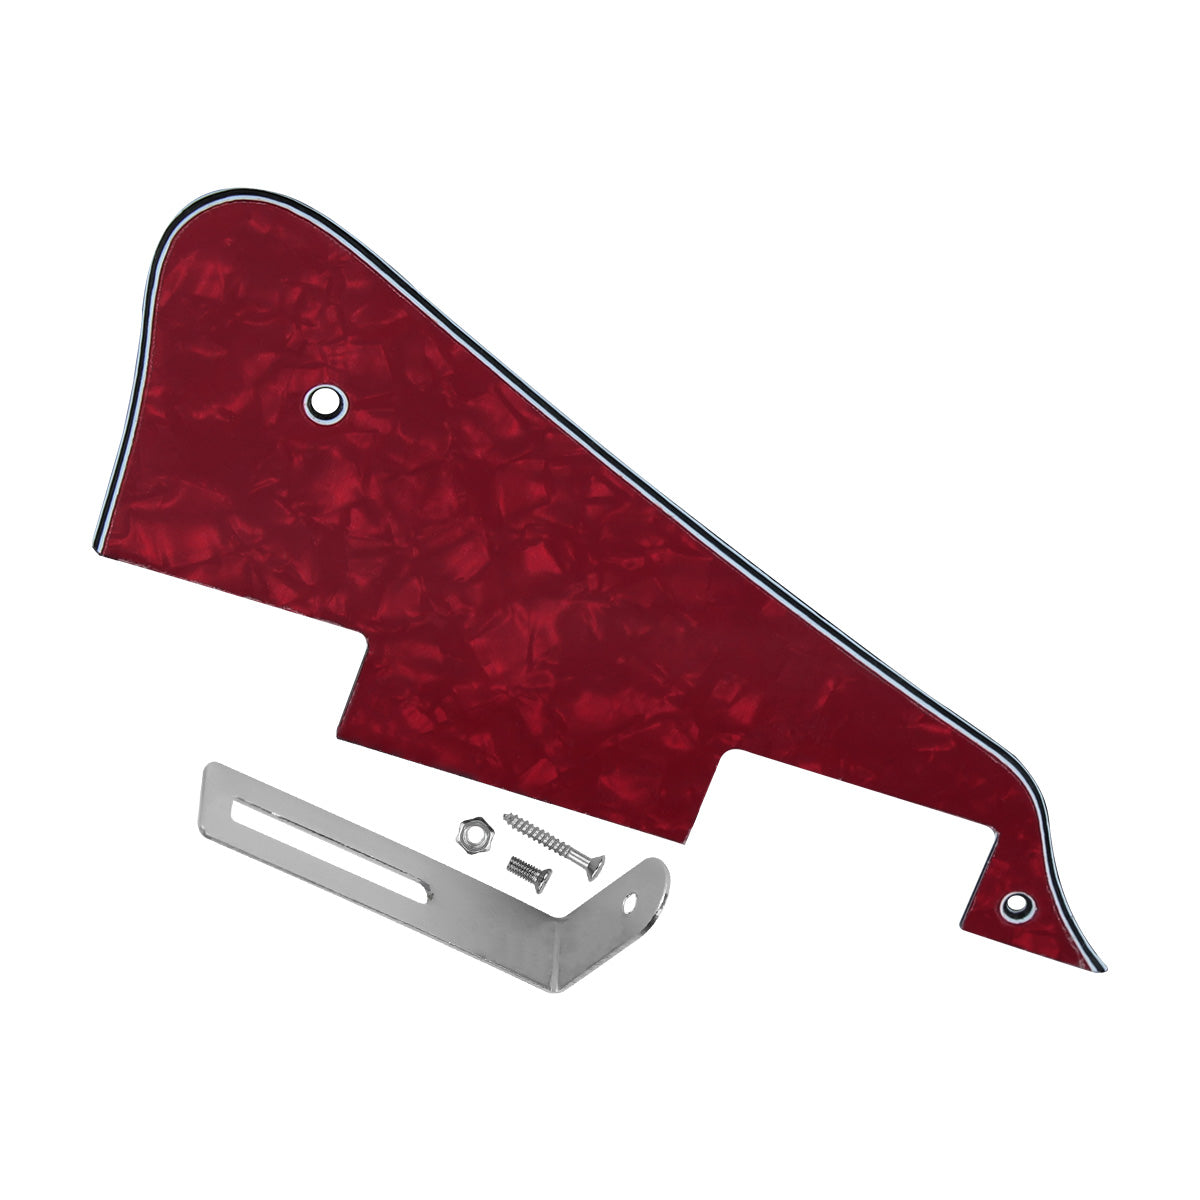 FLEOR LP Guitar Pickguard Scratch Plate with Metal Bracket for LP Style Guitar Accessories ,28 Colors Available